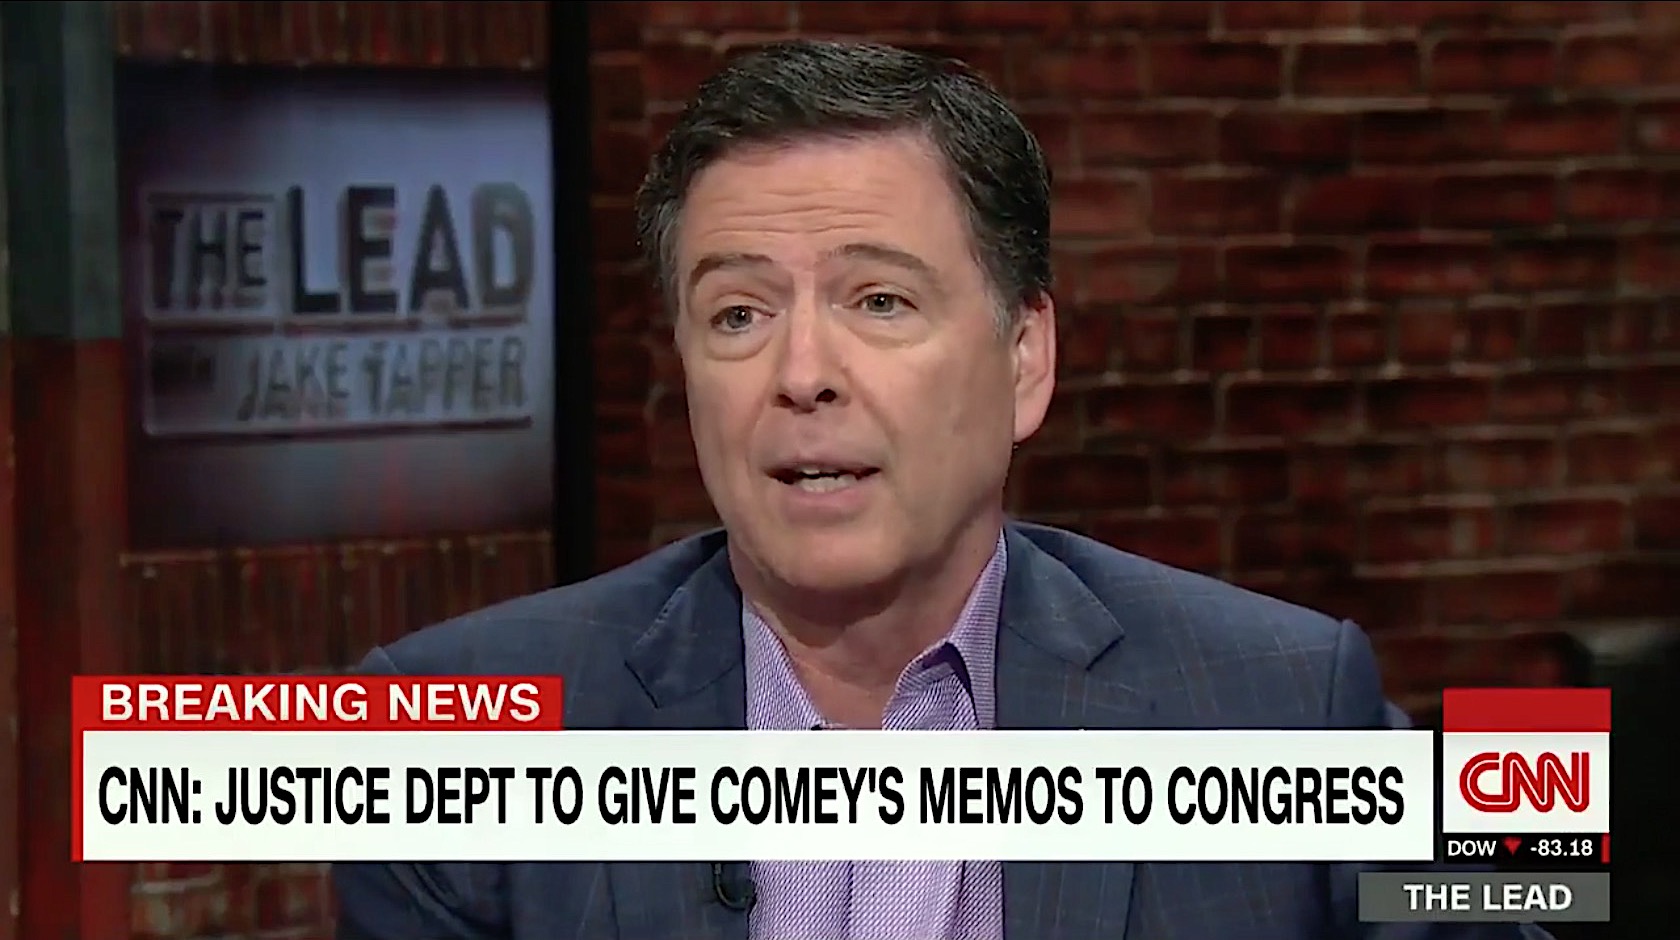 James Comey is fine with his memos being leaked